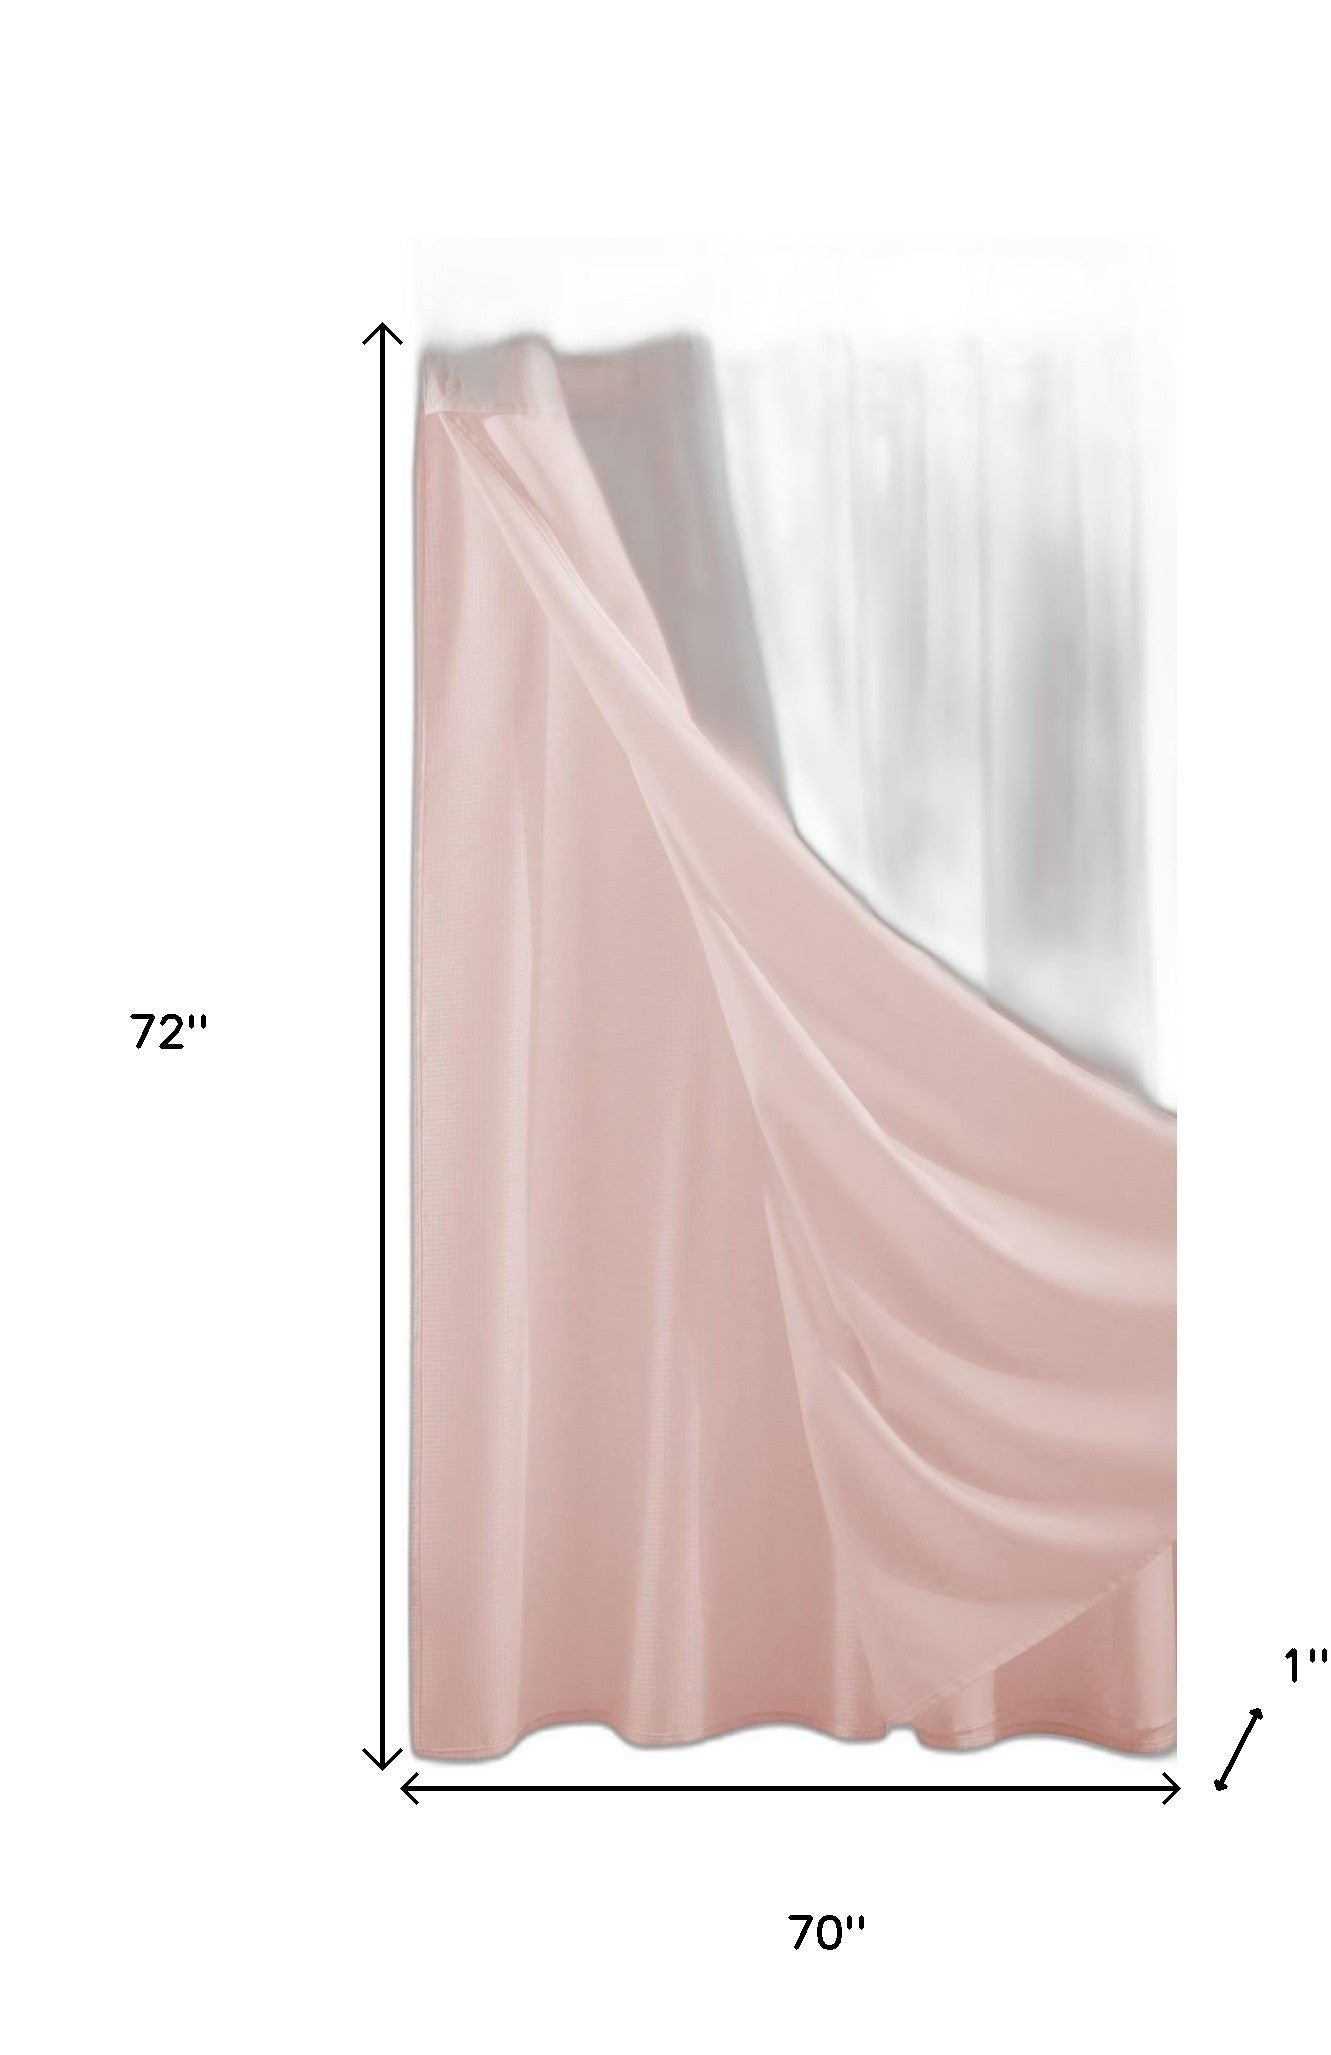 Blush Sheer and Grid Shower Curtain and Liner Set